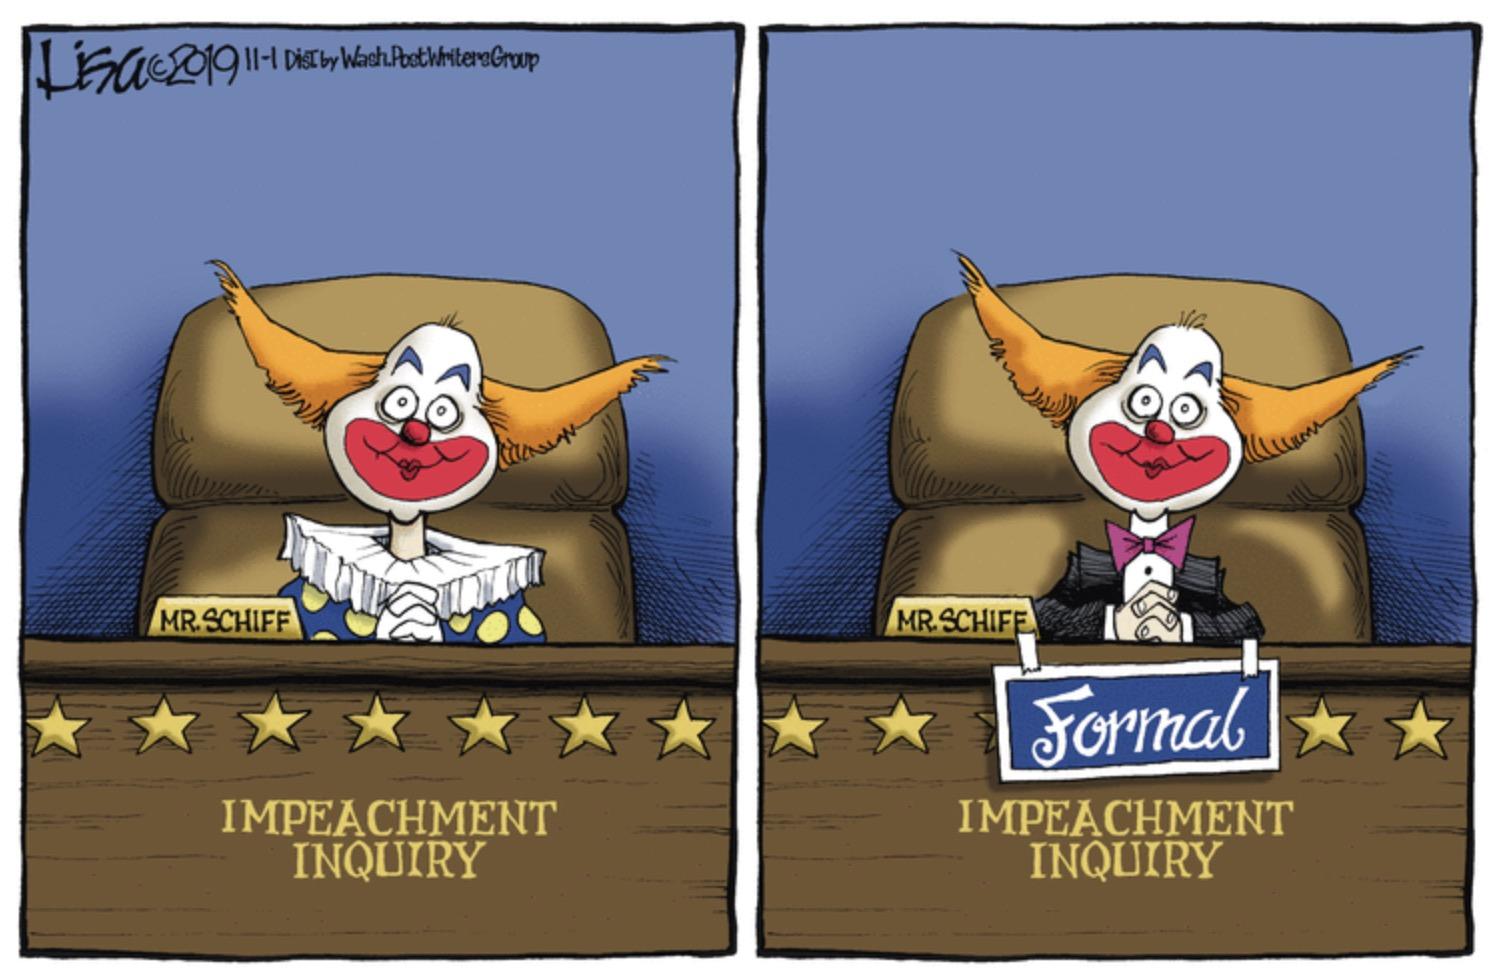 Impeachment cartoons: These biting image tell the story